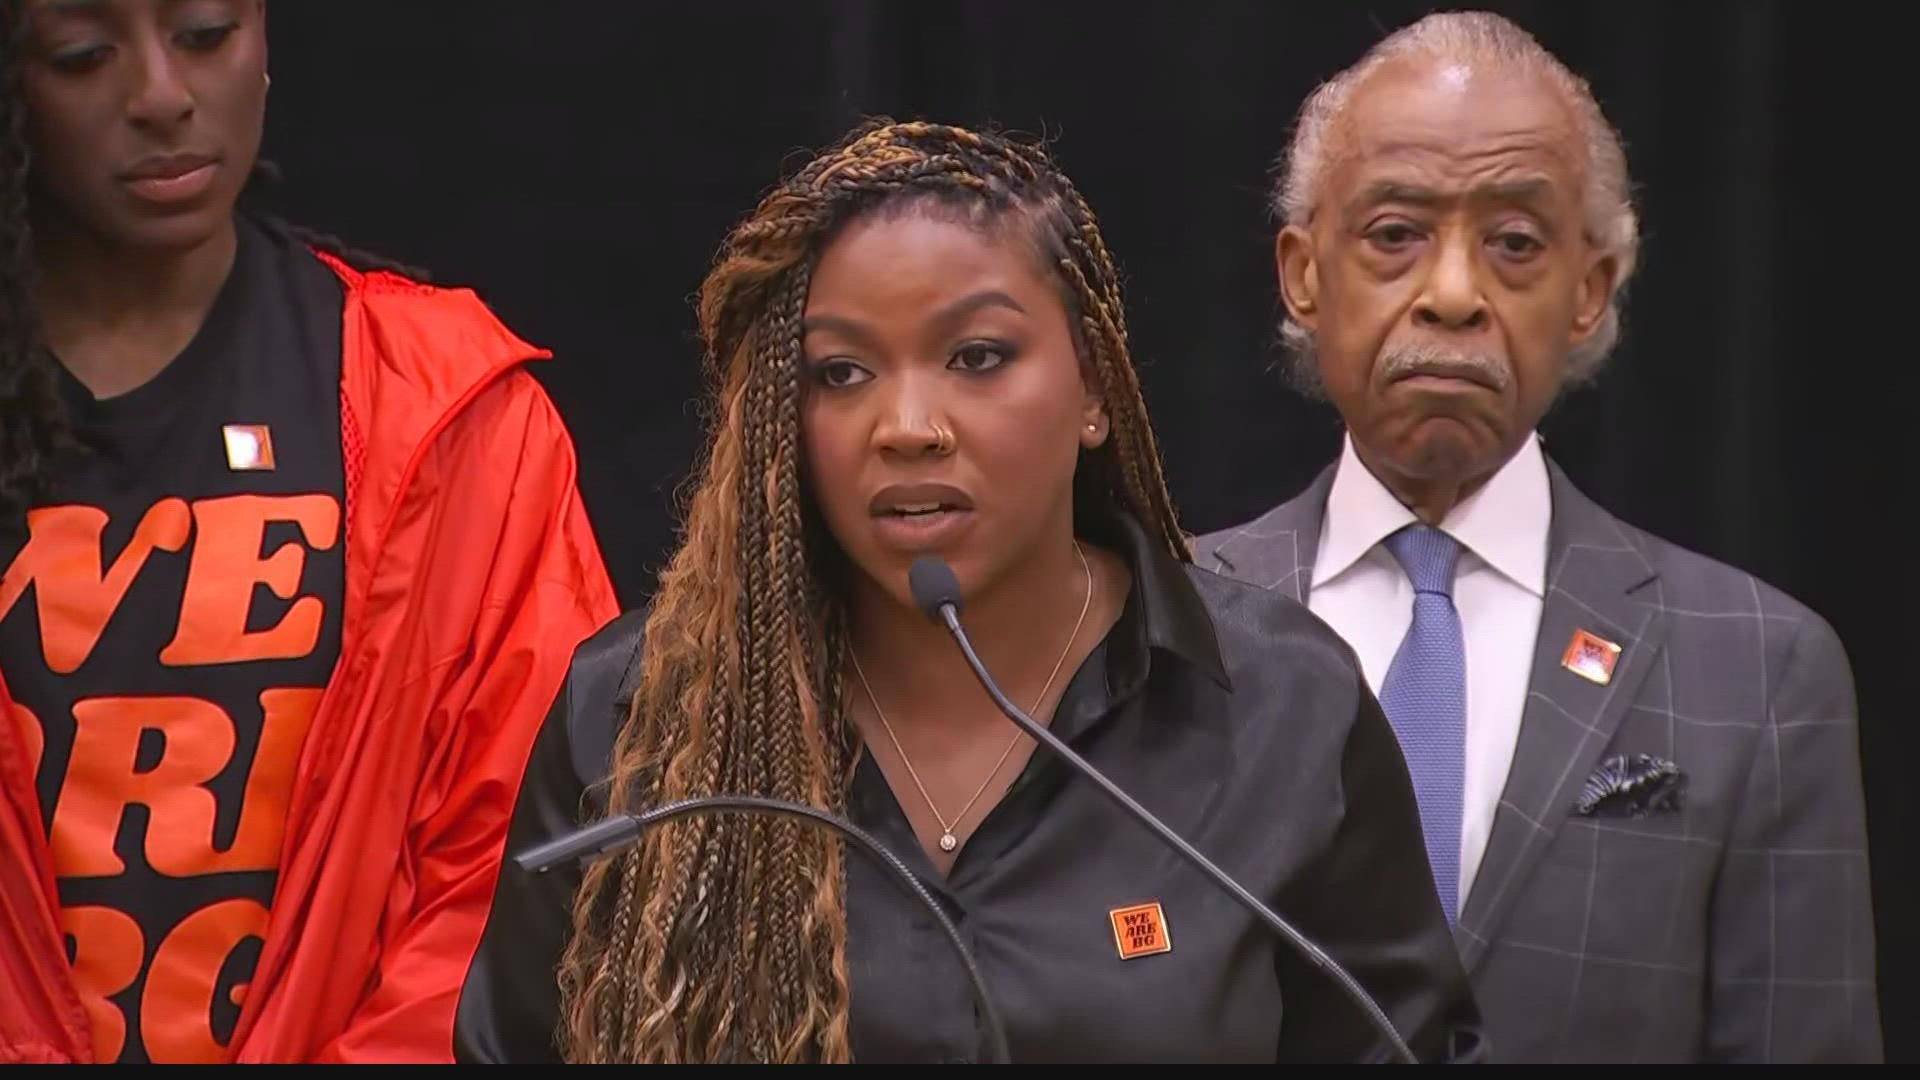 Brittney Griner's wife, Cherelle, appeared at a news conference with Reverend Al Sharpton in Chicago. Together they asked for prayers and support.